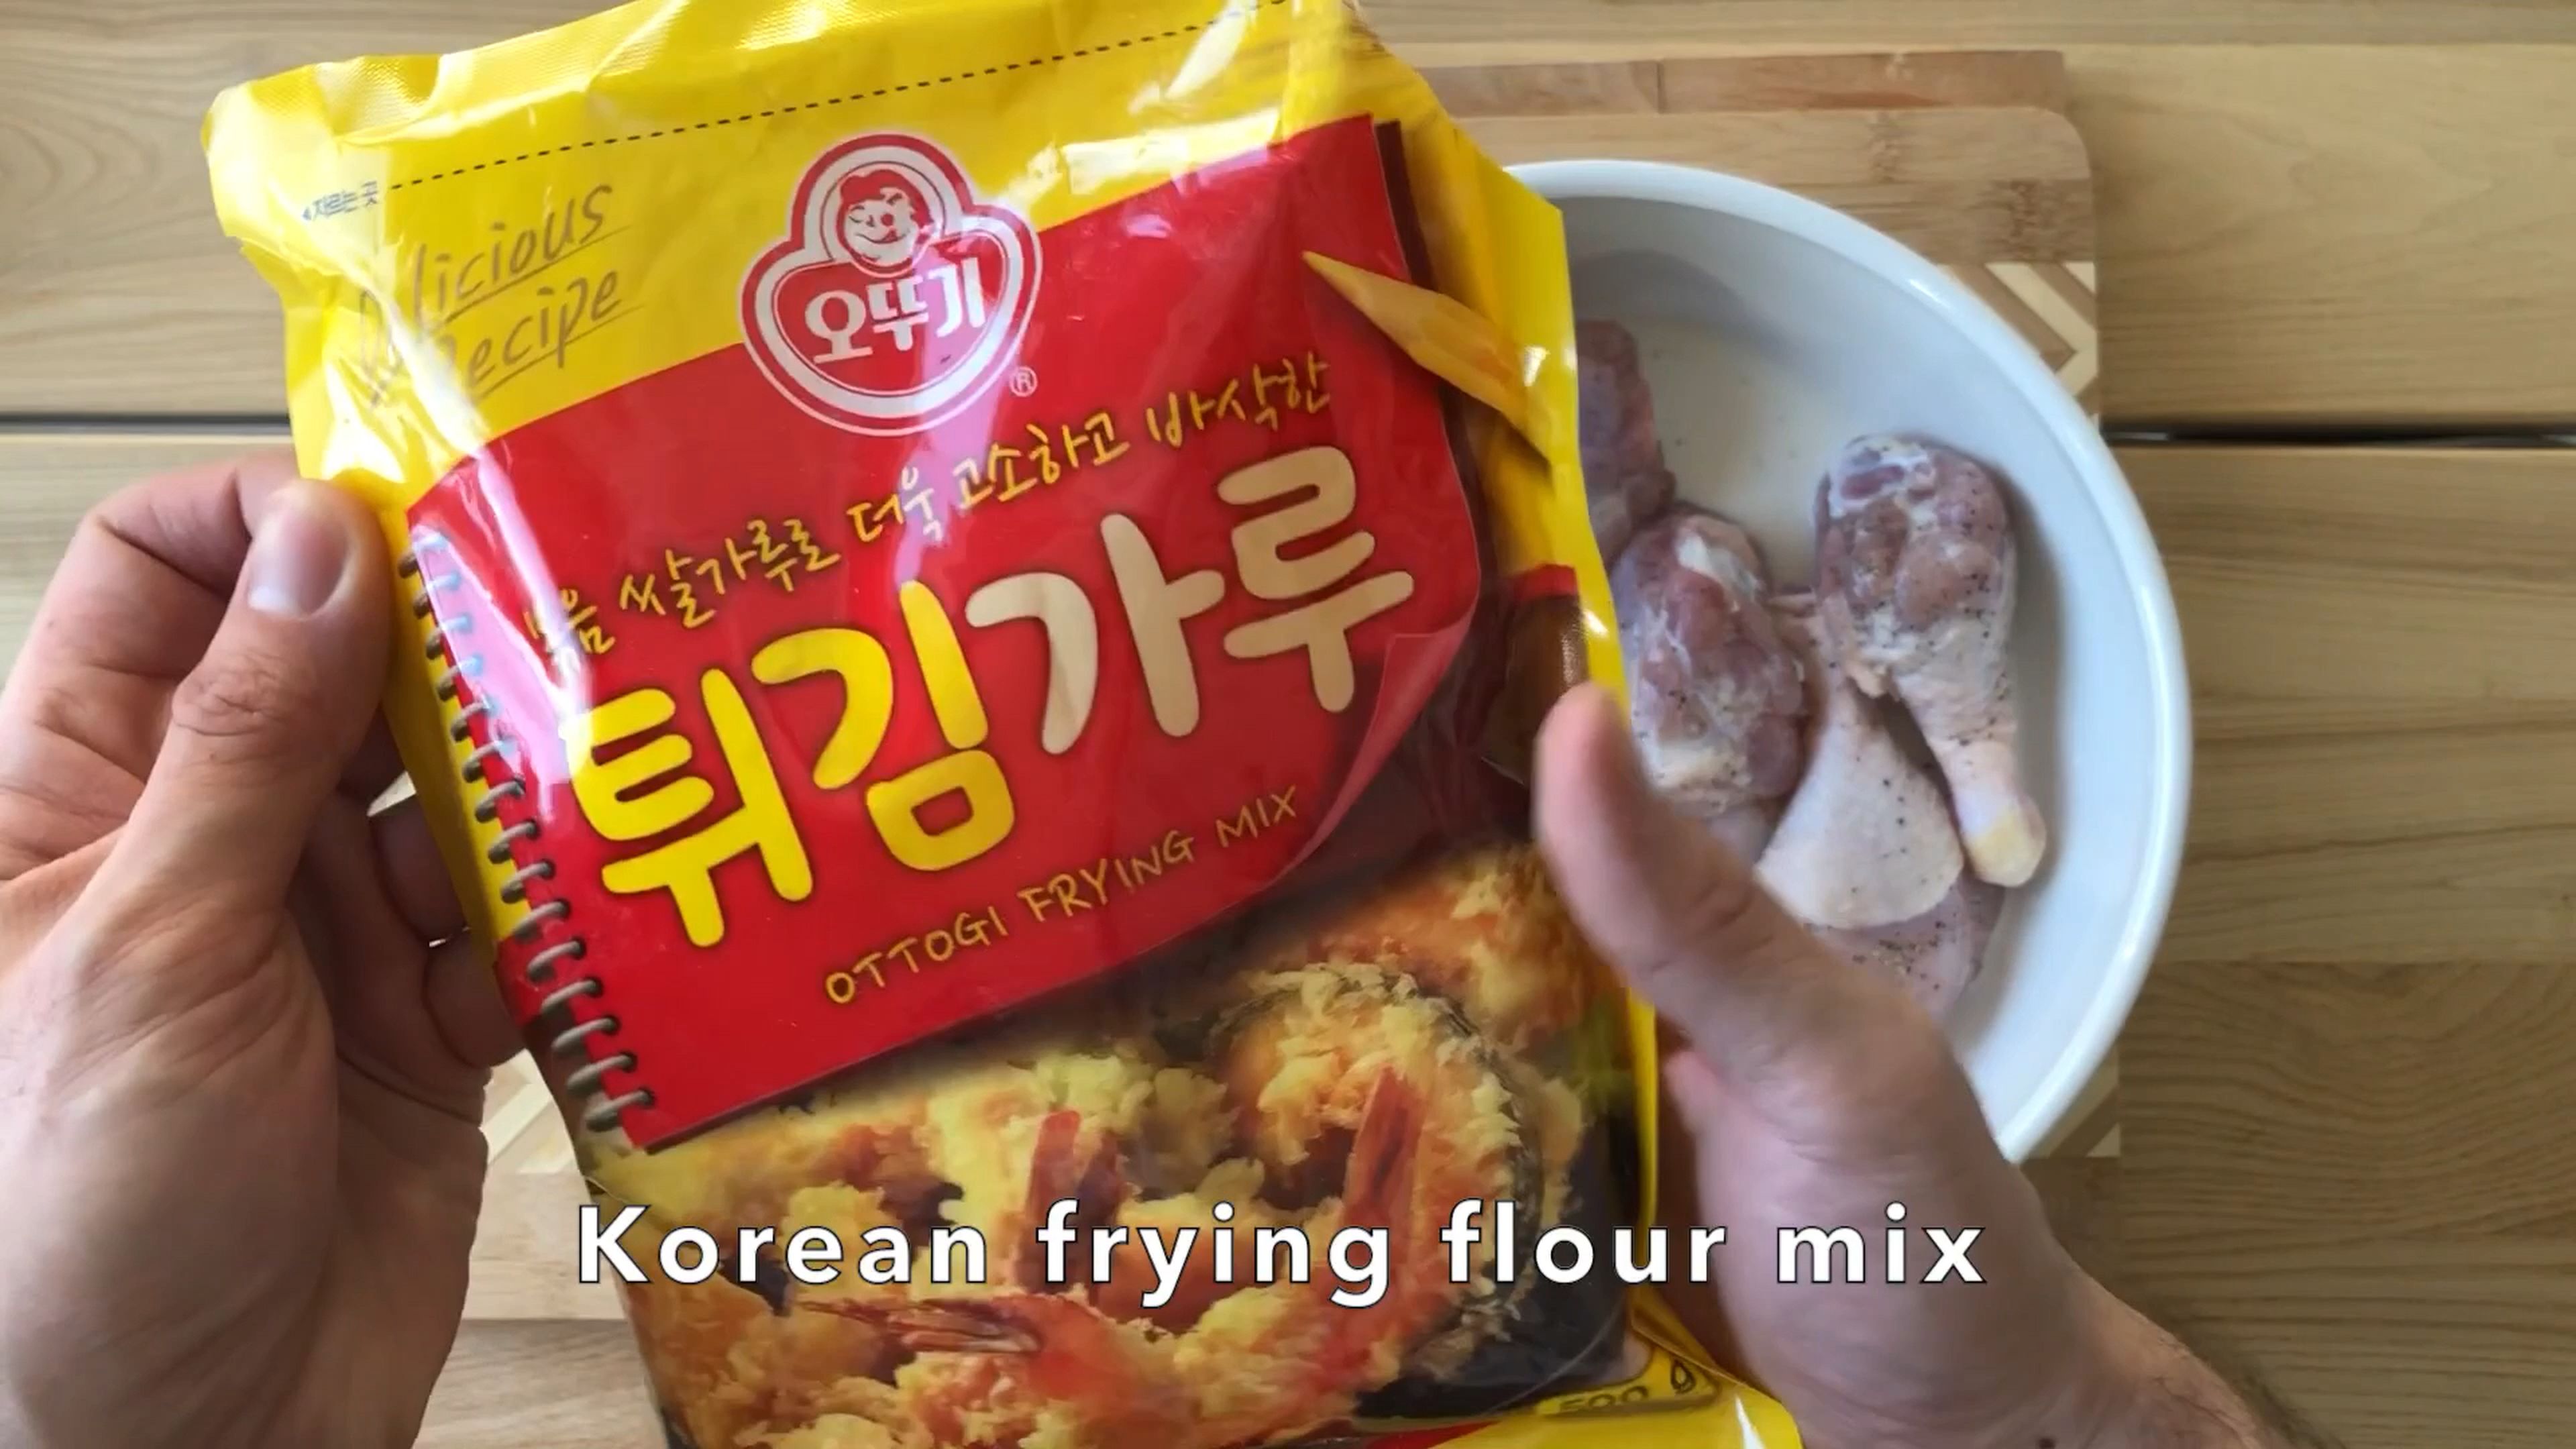 After letting the chicken rest, we’ll take it out of the fridge and prepare it for frying. Mix in 150 g of flour (about 1 & 1/2 dl) with the chicken. Do this in parts so you don’t get many lumps. If possible, look for flour meant for frying (튀김가루 in Korean). While doing this, heat 1 liter of oil on medium-high in a deep pot.